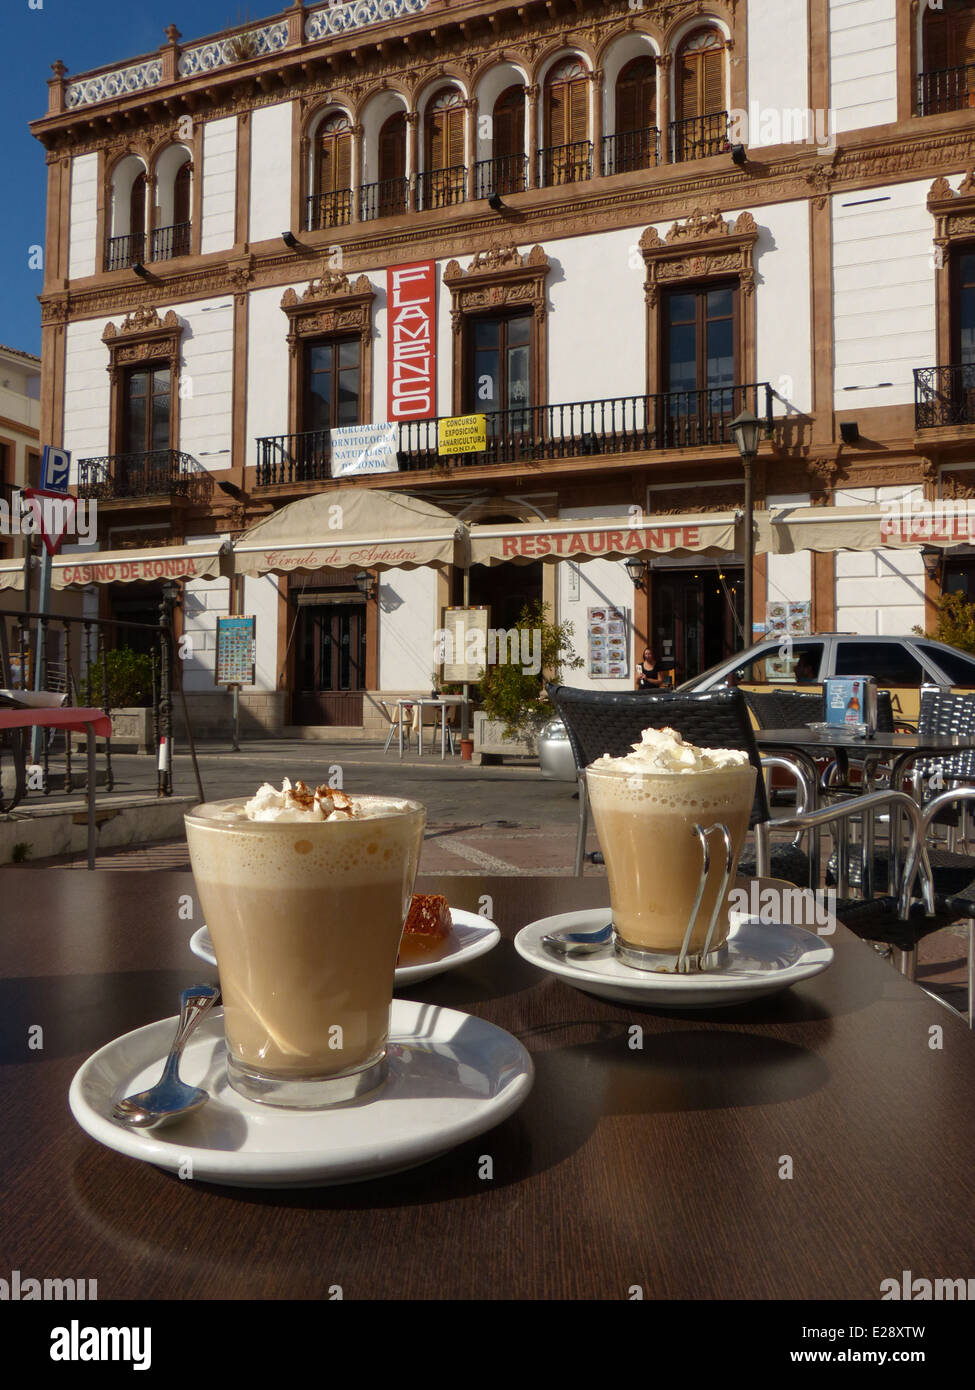 Two coffees on a cafe table in front of an ornate building in Ronda town square Stock Photo